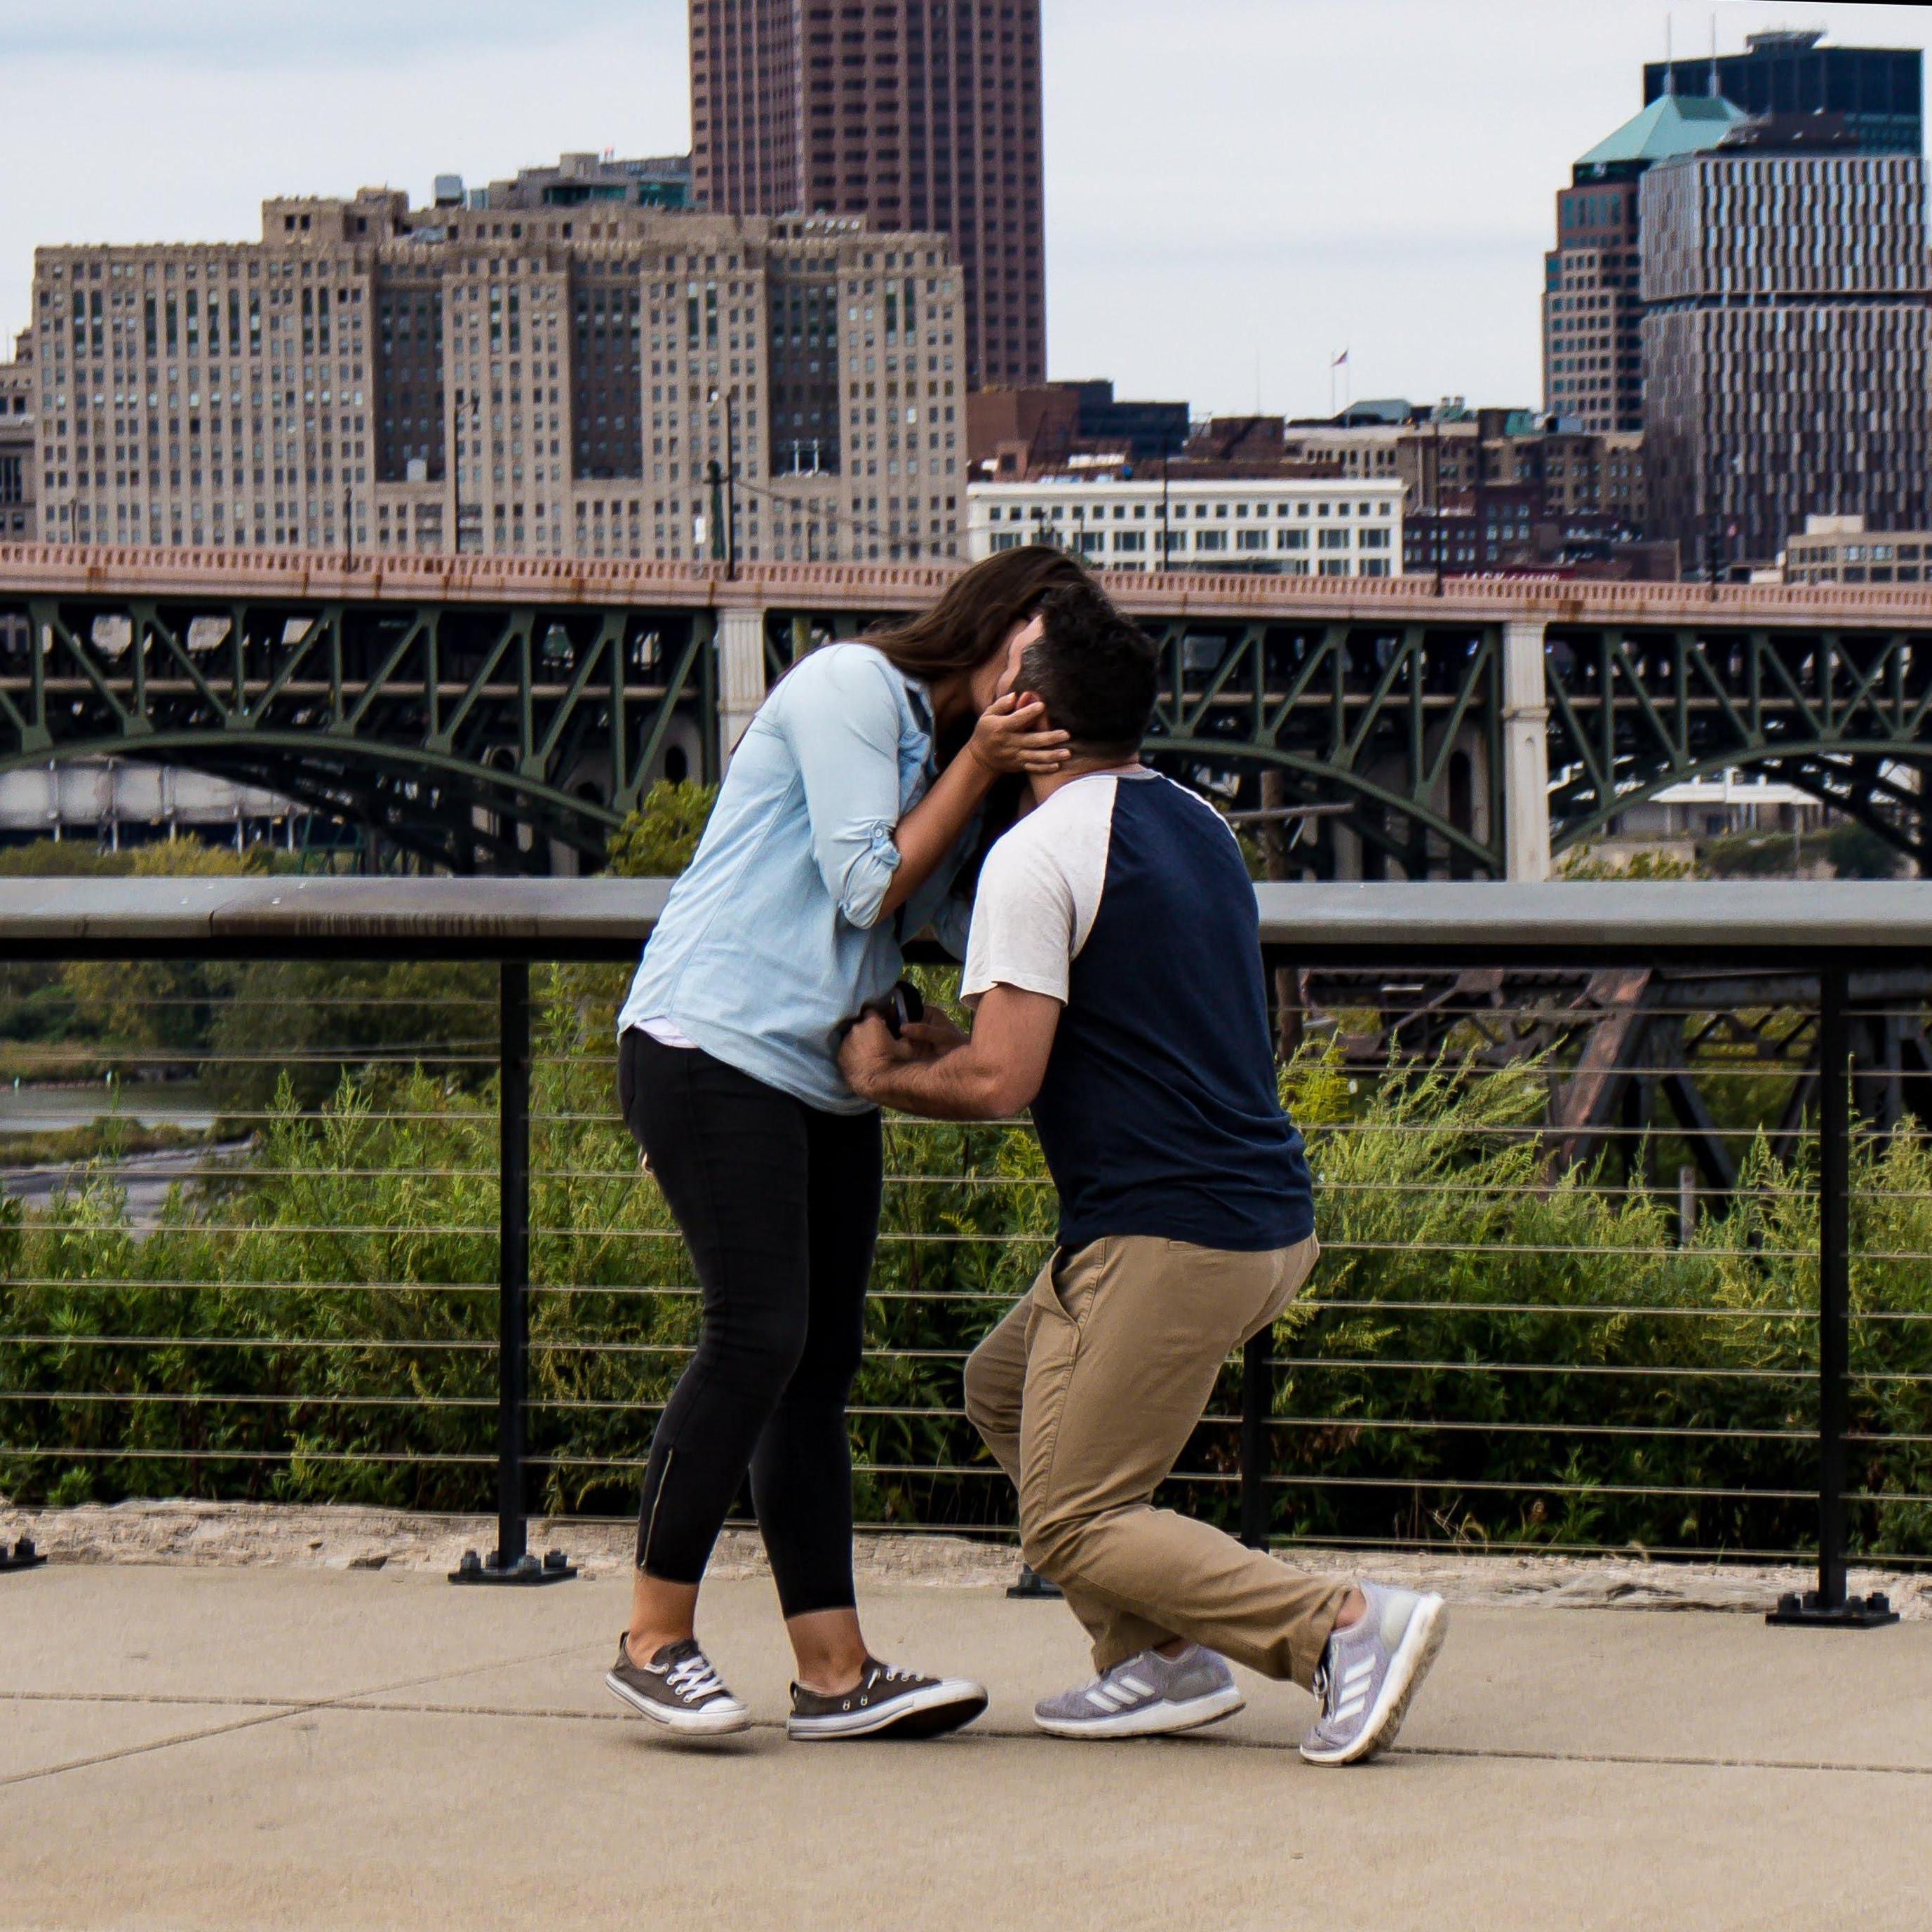 When Tom proposed, he arranged for his coworker Mano to photograph the moment. He actually was down on one knee but we were so excited, it wasn't for long.